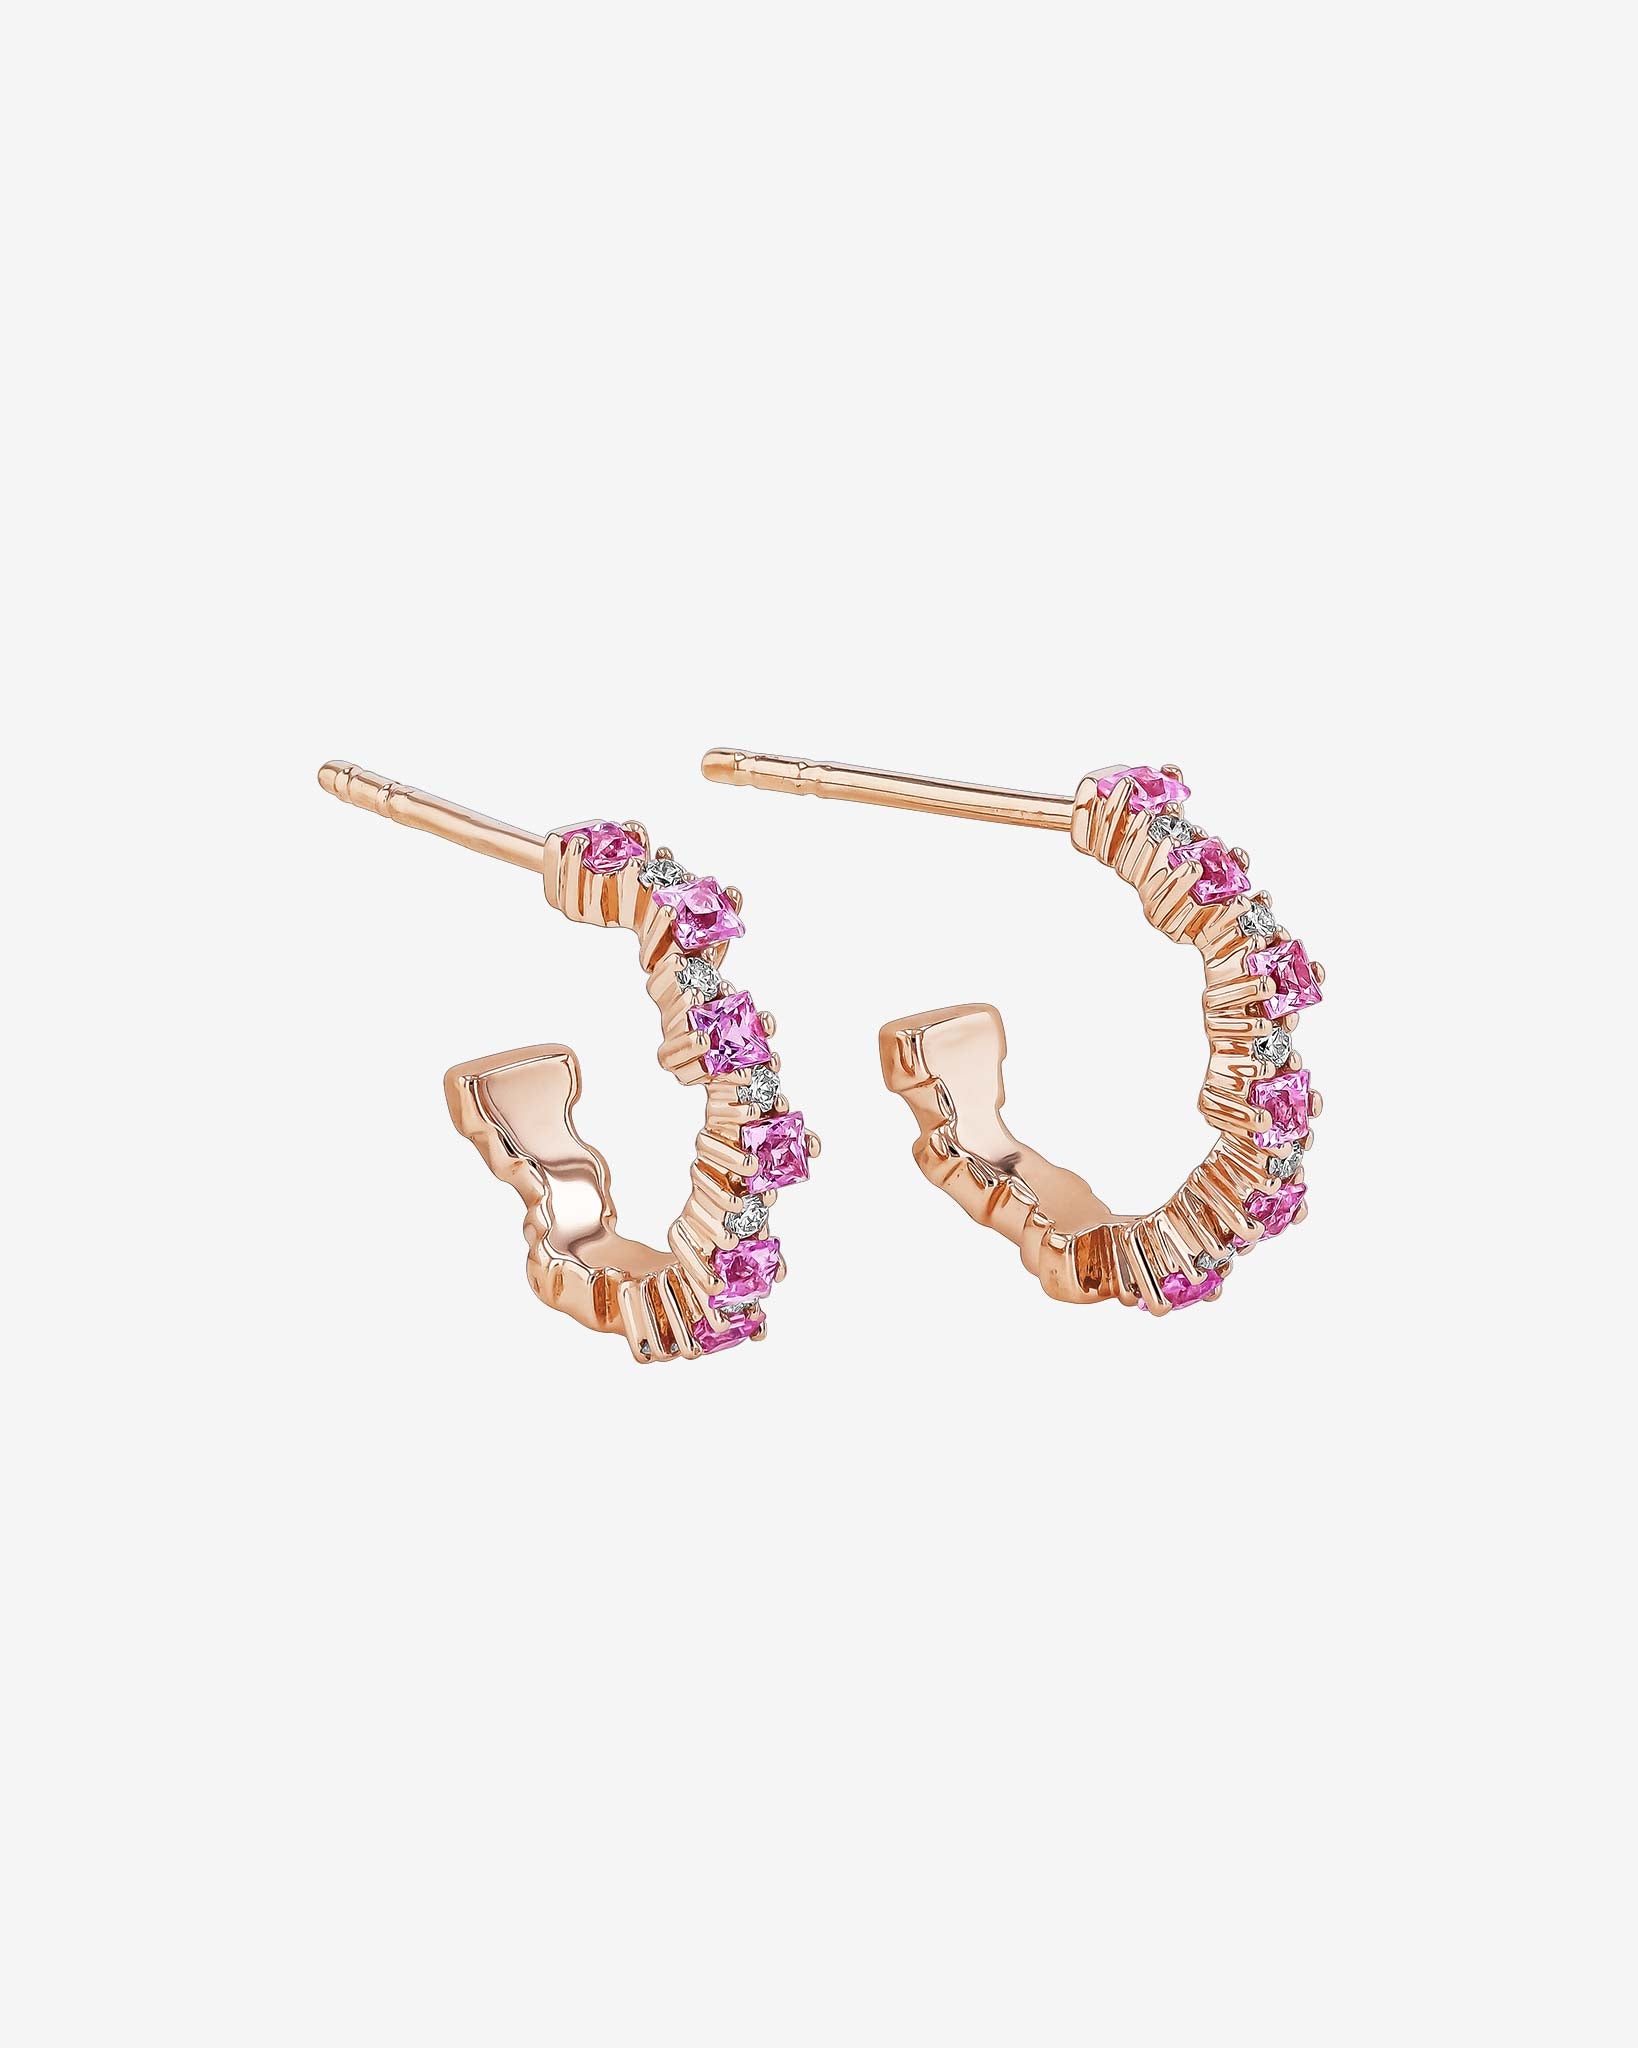 Suzanne Kalan Princess Staggered Pink Sapphire Mini Hoops in 18k rose gold